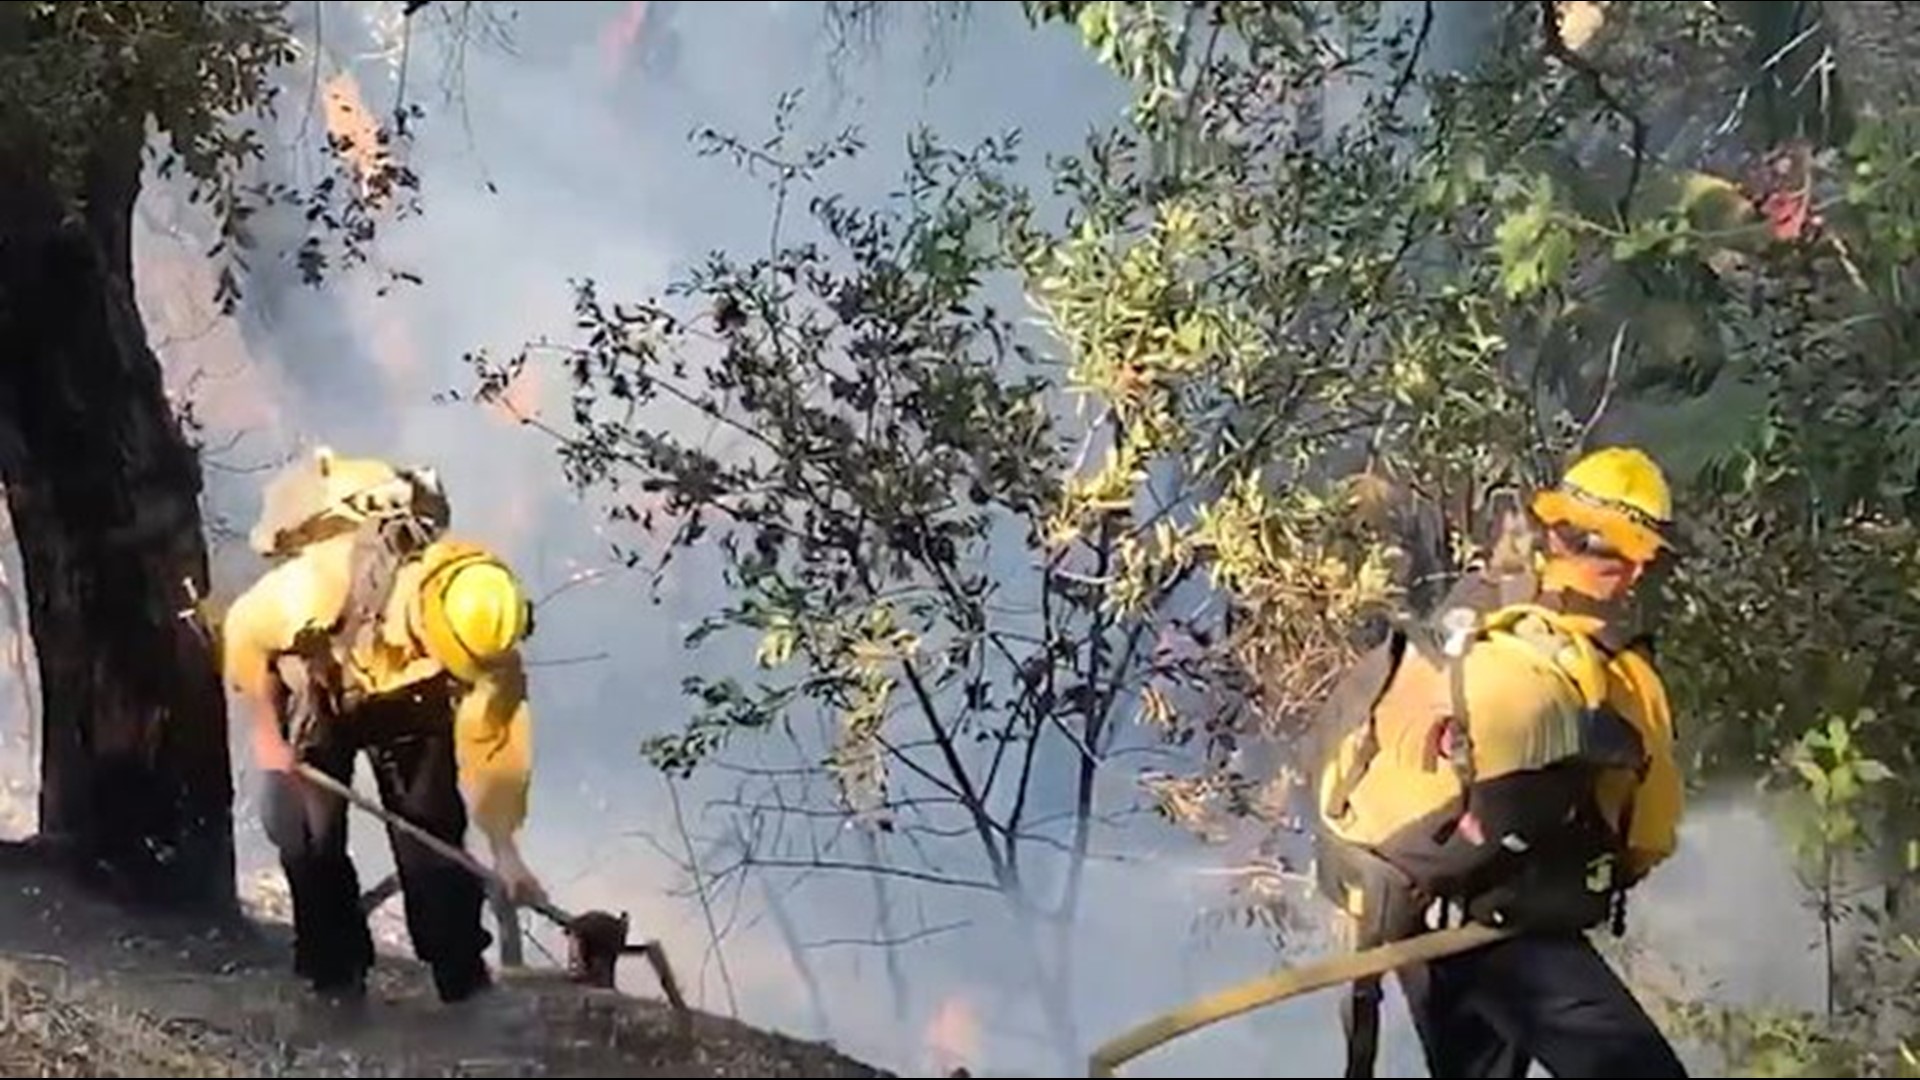 No injuries to fire crews or local residents were reported as of Oct. 27 as the Blue Ridge Fire raged at 0% containment in Orange County, California.